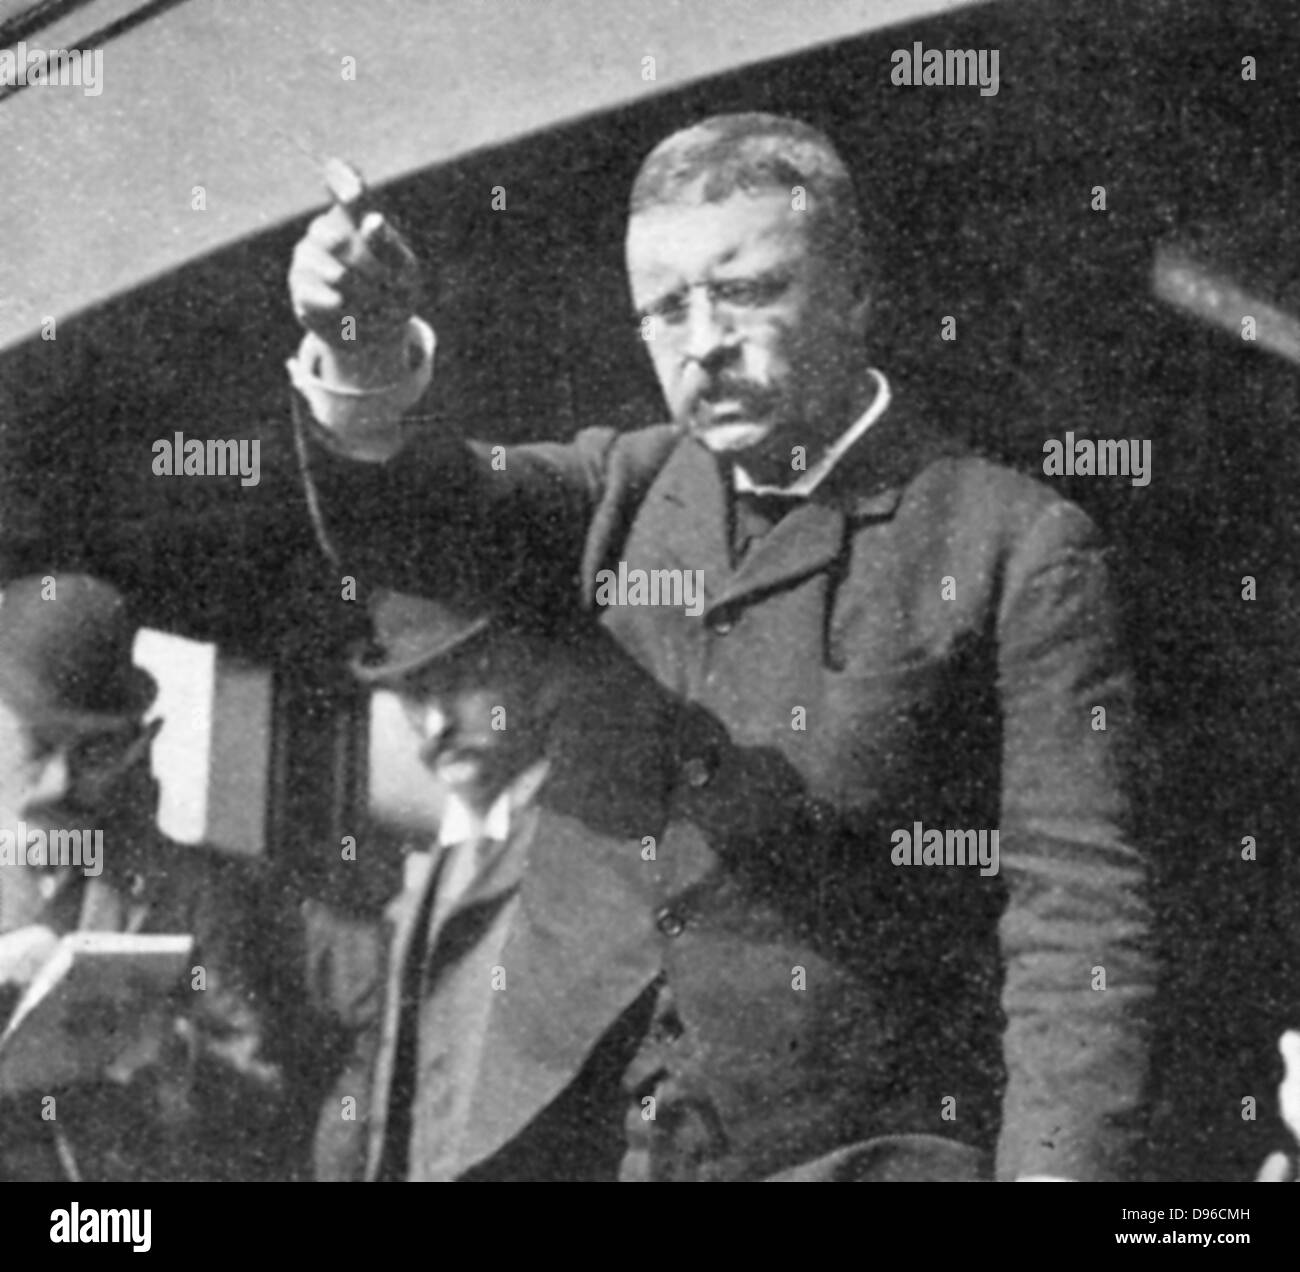 Theodore Roosevelt (1858-1919) addressing a meeting in New York State. Roosevelt became 26th president of USA after the assassination of McKinley in September 1901. Stock Photo